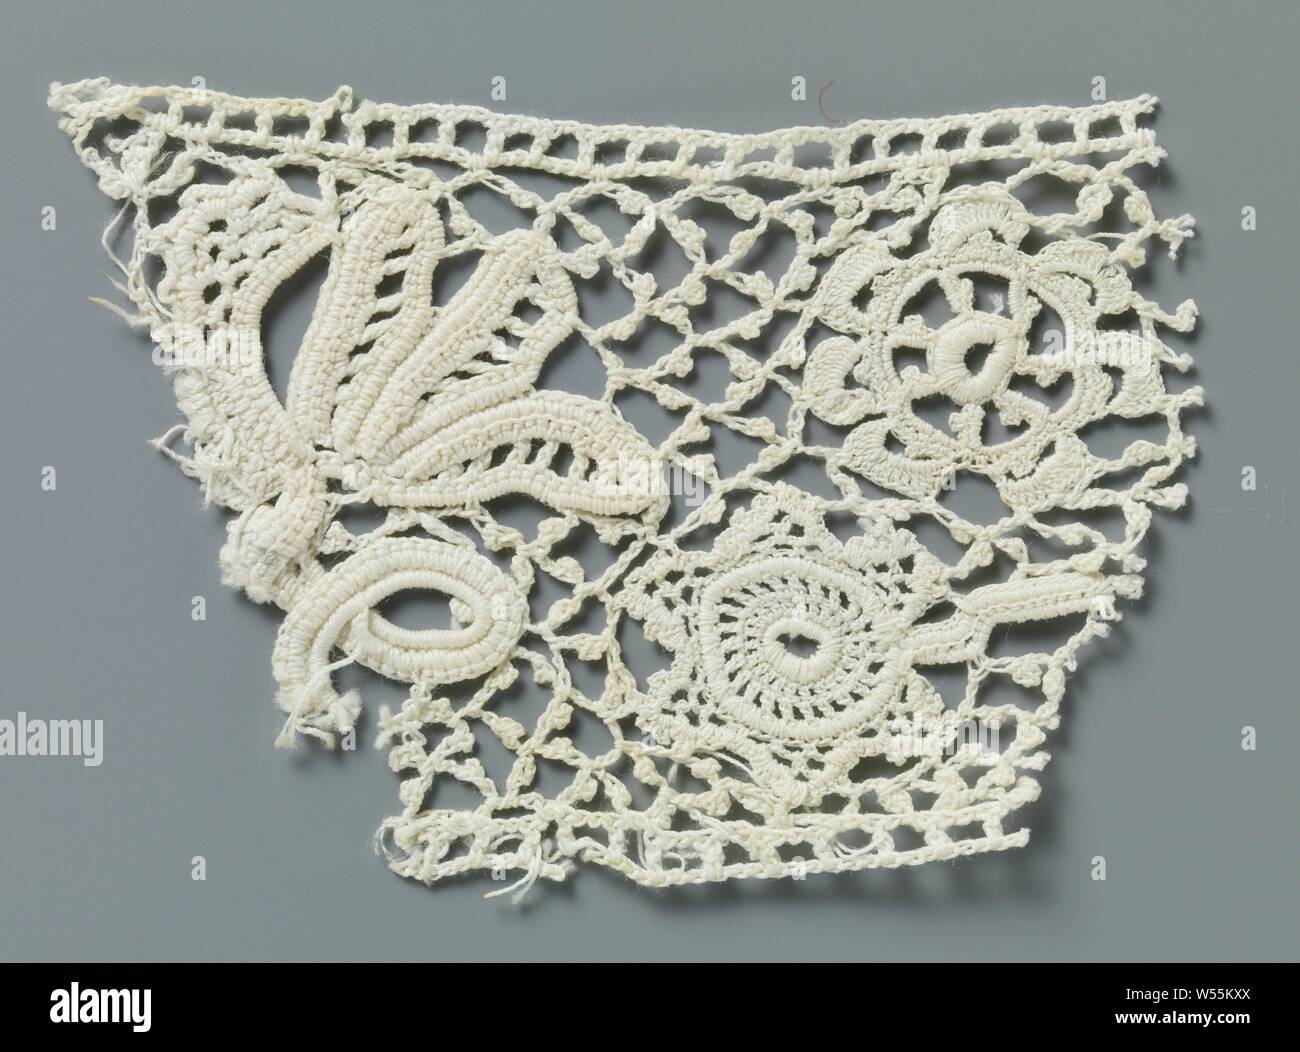 Fragment of crocheted lace with twisted twig and star-shaped flower, Fragment of natural-colored Irish crocheted lace. Pattern in which a twisted flower twig with a rosette flower and several elongated leaves is alternated by a hanging star-shaped flower on a short stalk without a leaf. Crocheted diamond mesh with picots. The top is finished with a straight edge. The undulating bottom edge is trimmed with three-part bowed arcs., anonymous, Ierland, c. 1890 - c. 1909, cotton (textile), l 8.5 cm × w 6 cm, Delft, c. 1690–1700 Stock Photo